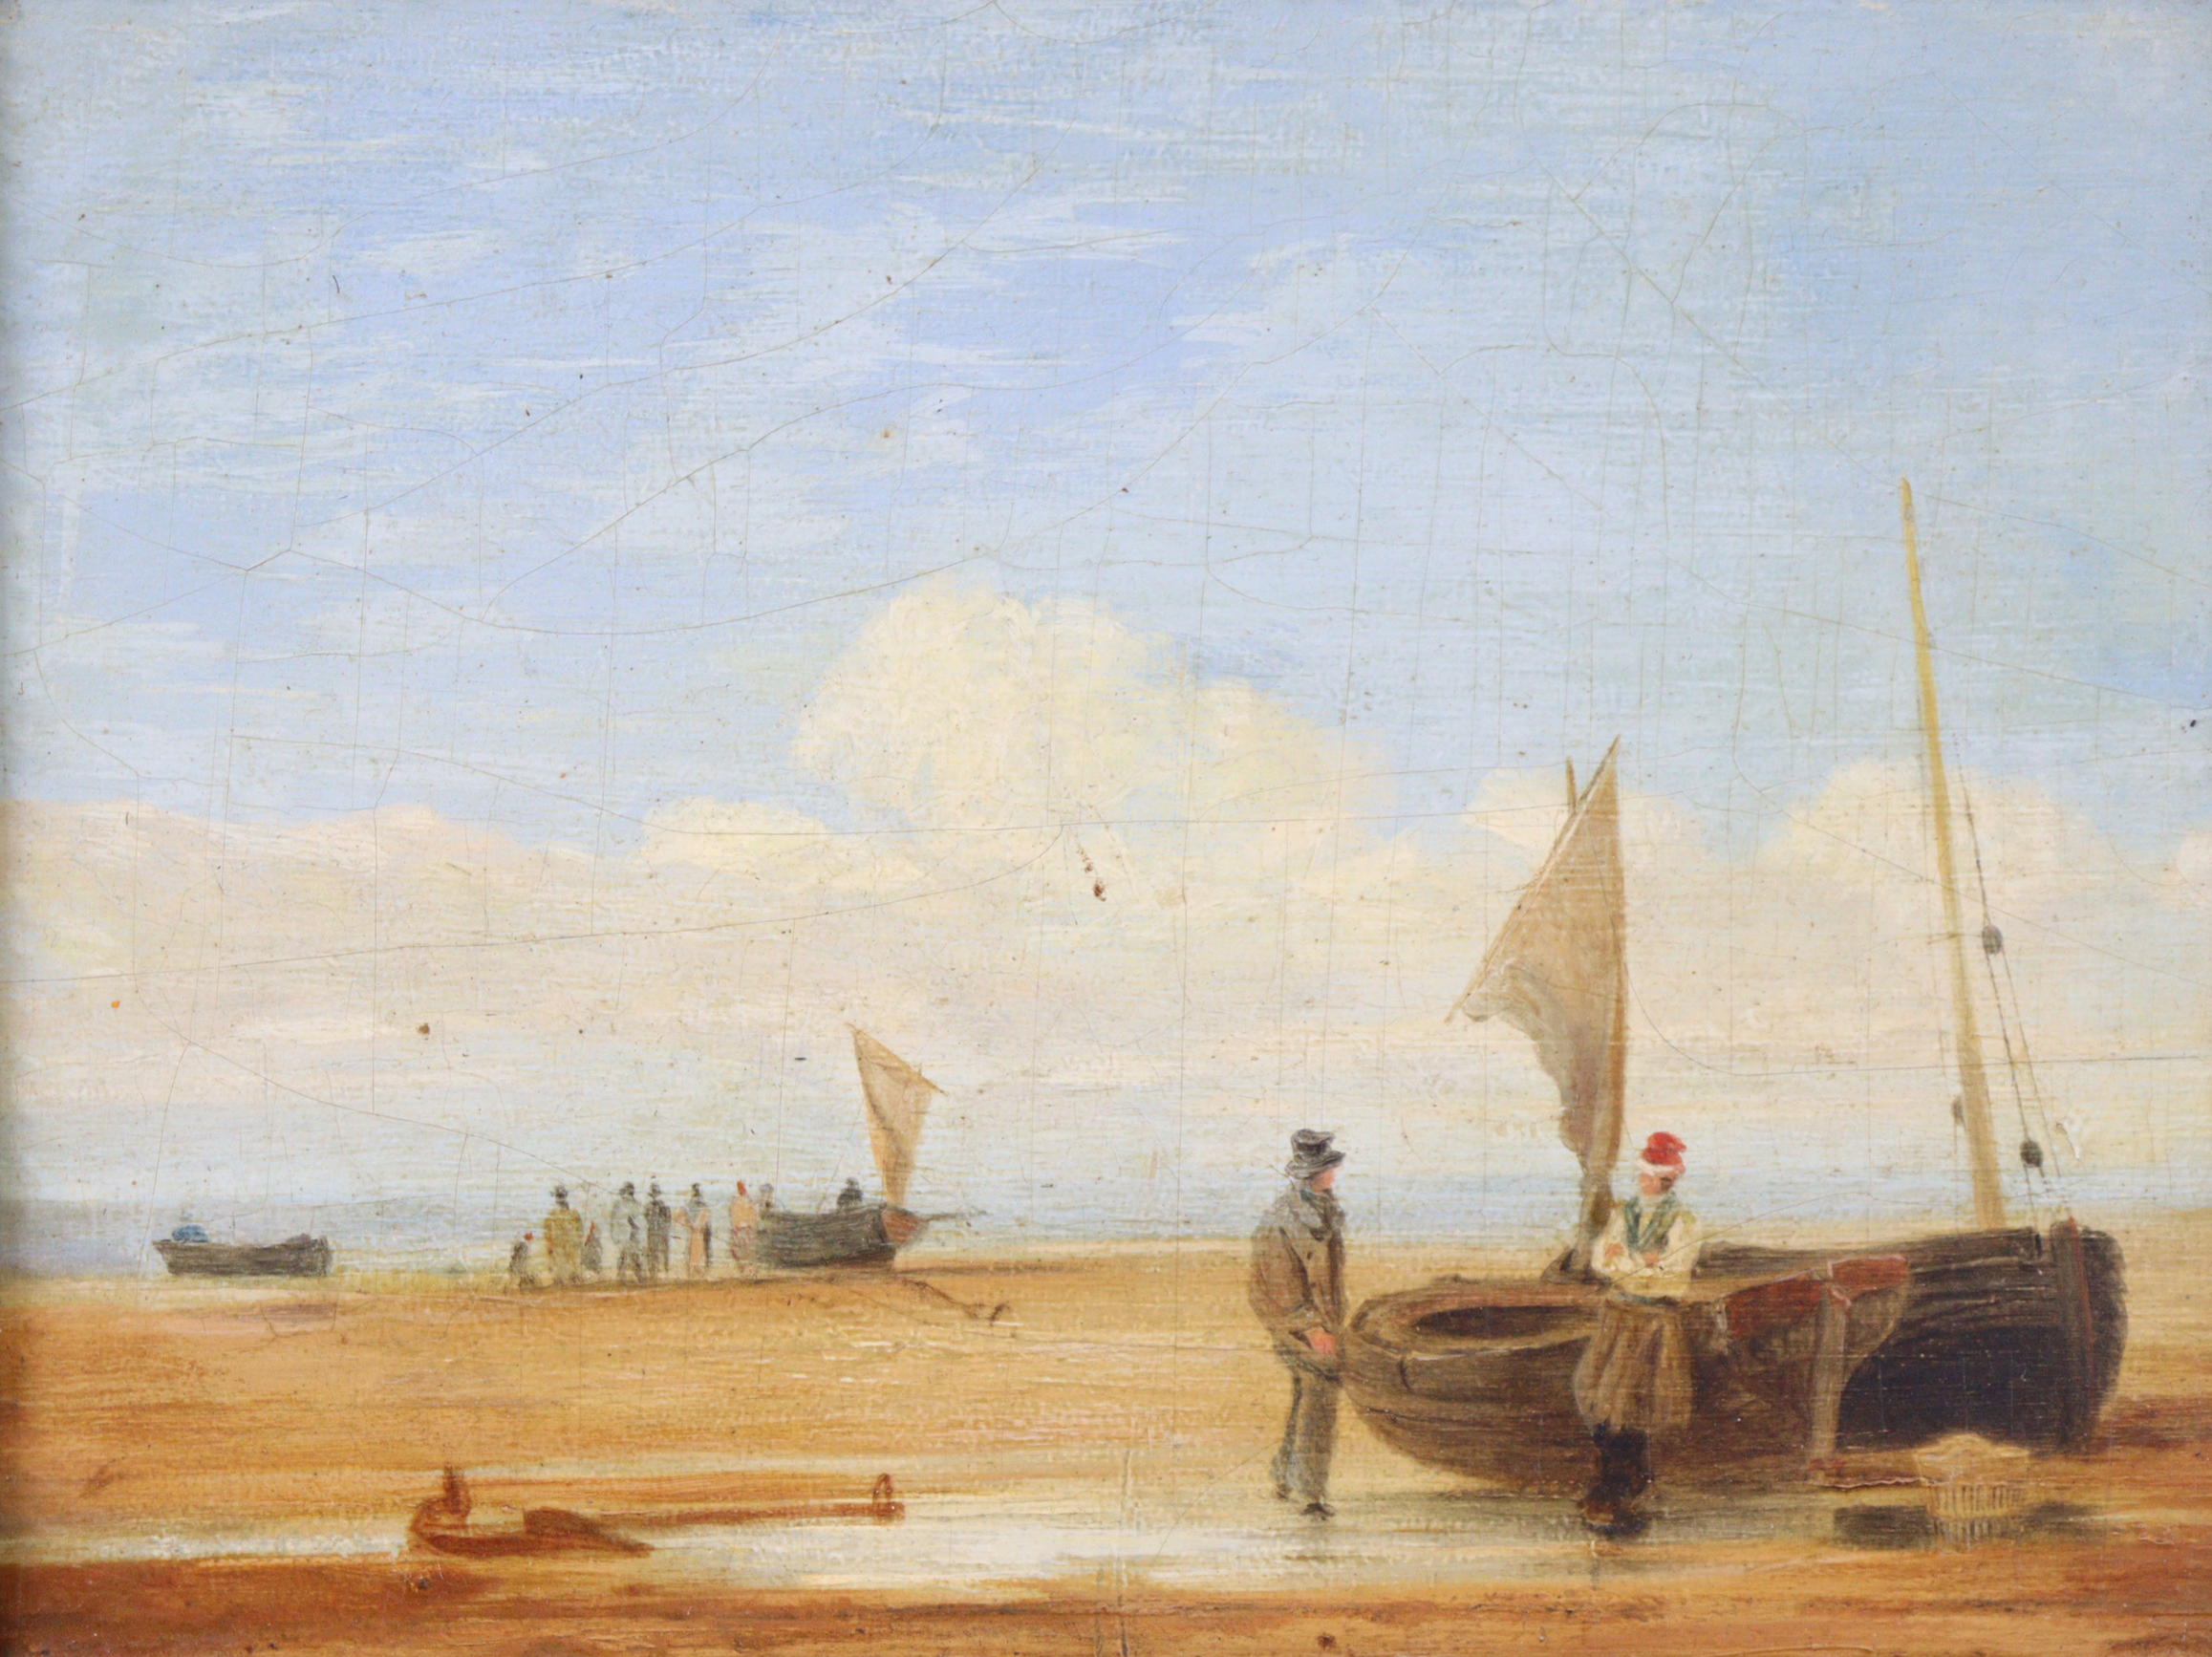 Follower of William Collins, R. A. (1778-1847). Fishing vessels & figures on a sandy beach; oil on